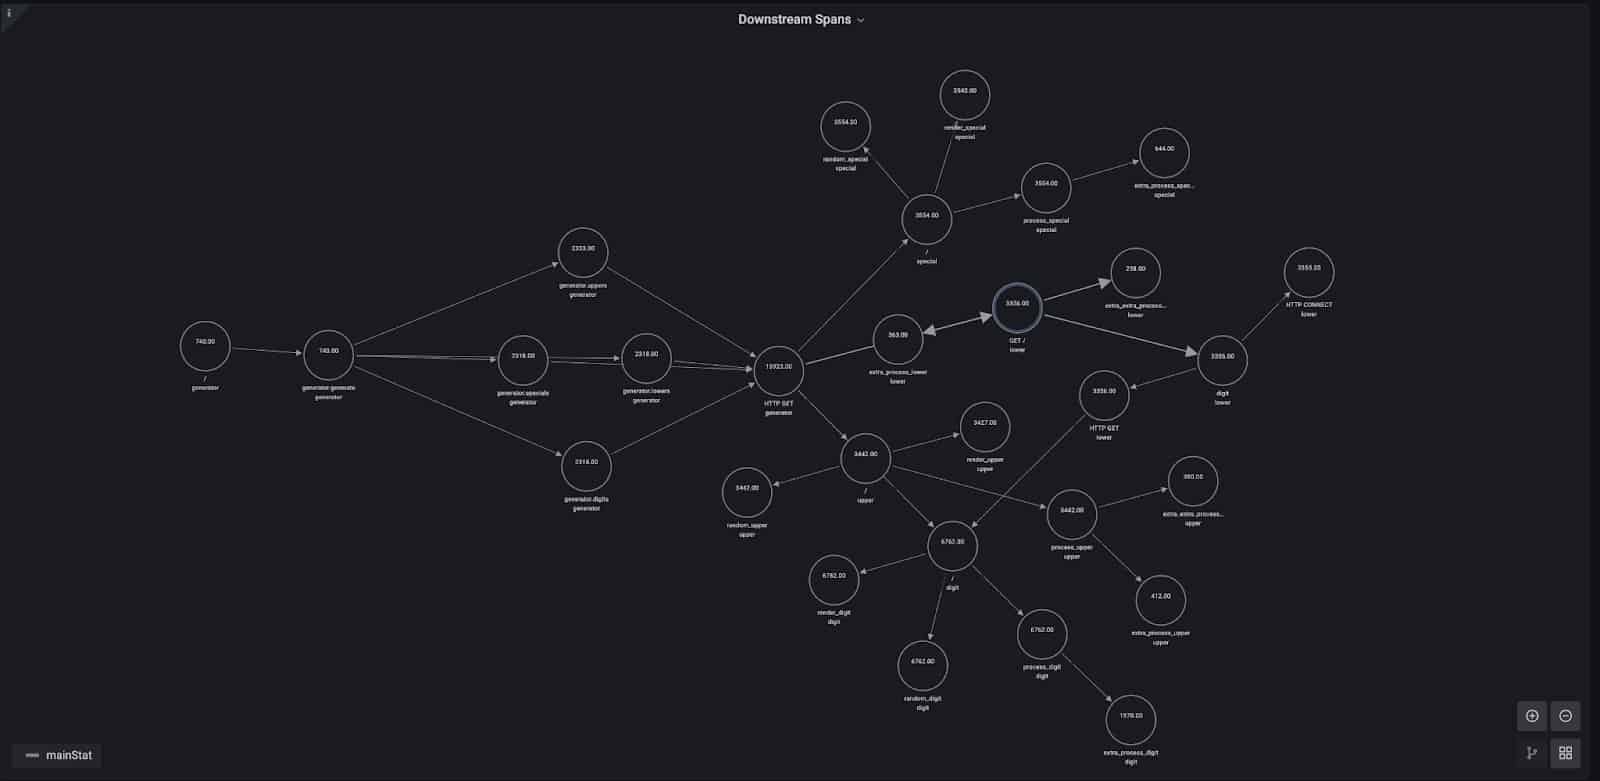 Grafana node graph showing downstream services and operations.